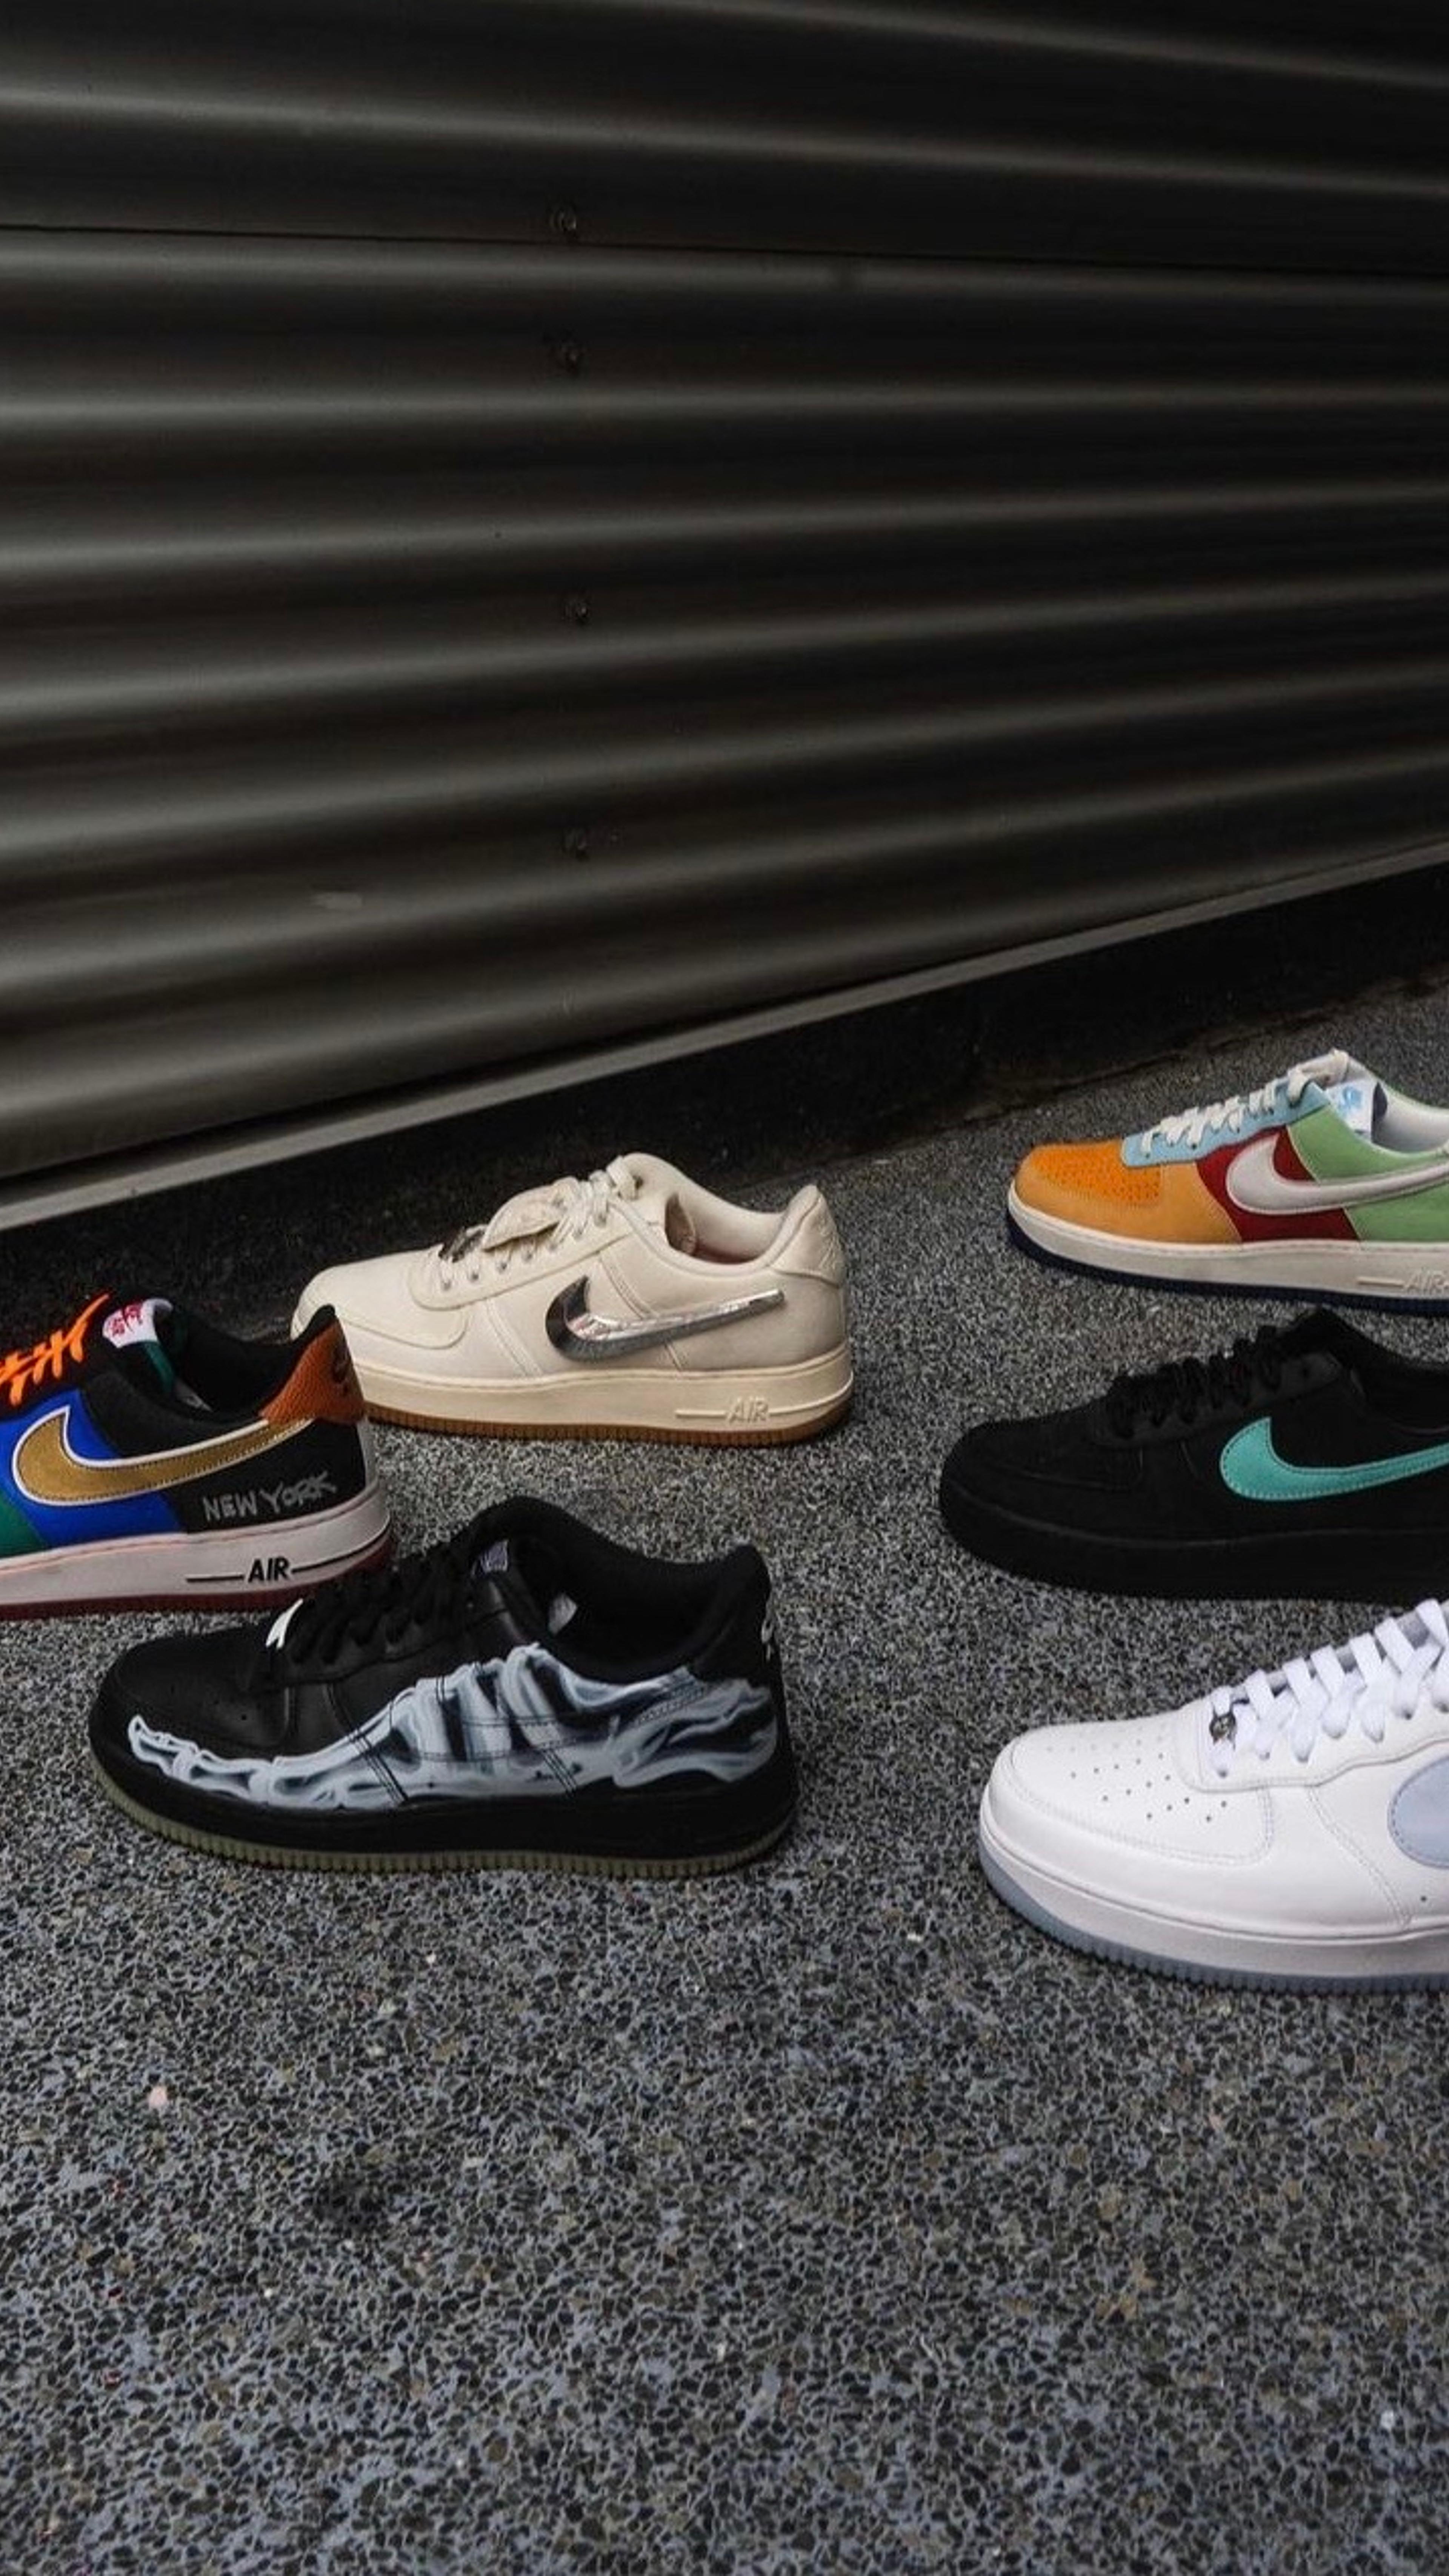 Preview image for the show titled "Air Force 1" at Today @ 8:00 PM